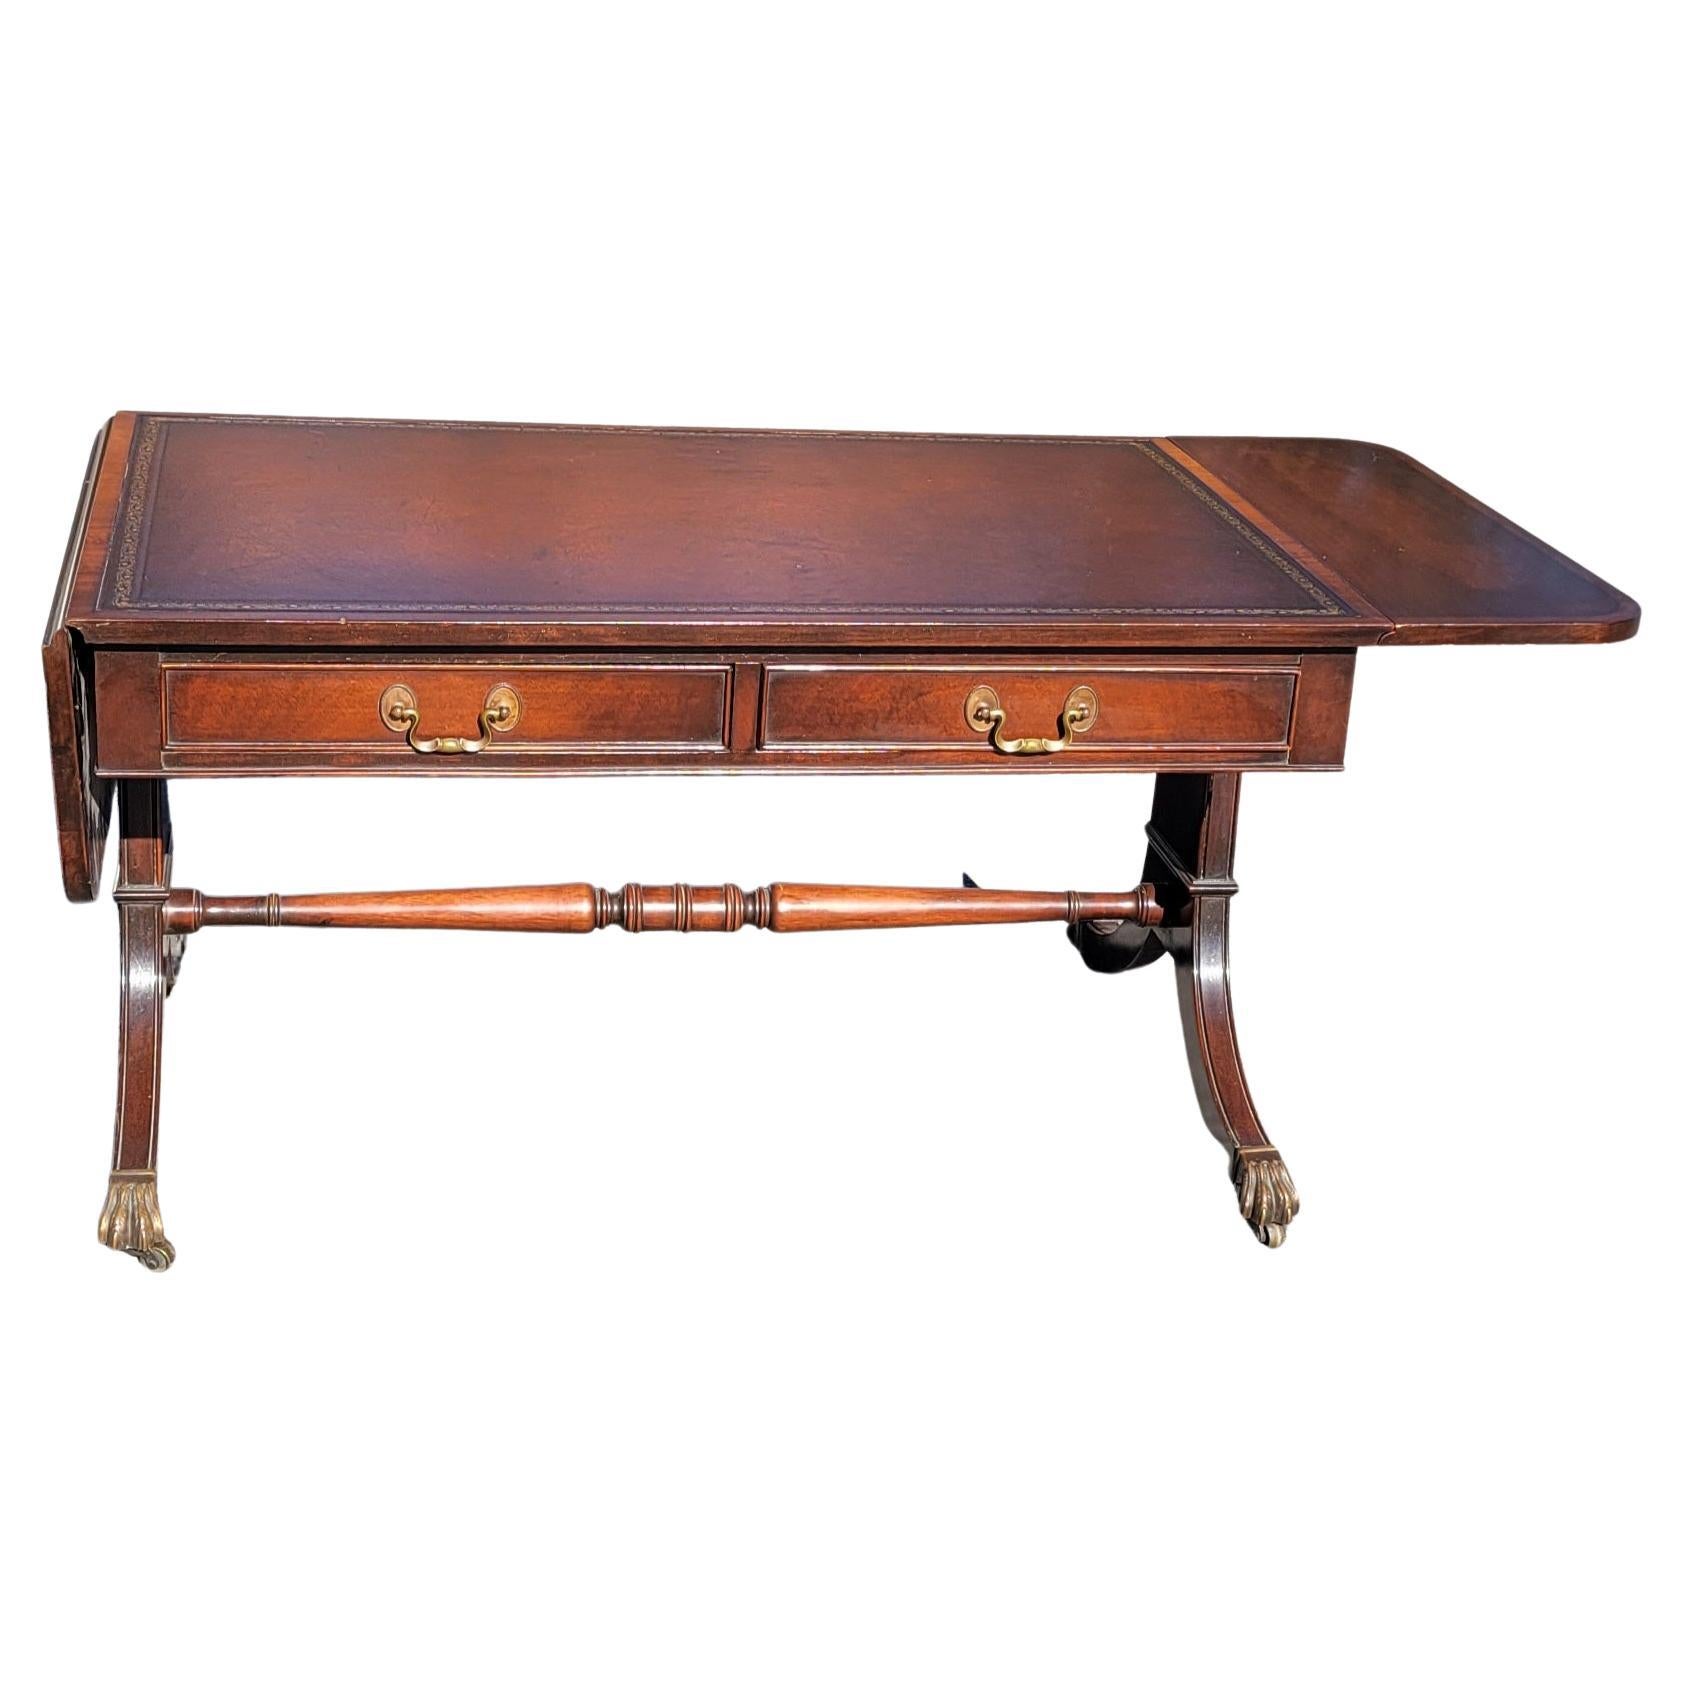 A George III style Mahogany and leather top inset drop leaf coffee table in good vintage condition. Table on original wheels. Wheel may be removed if not desired.
Measures 46.25